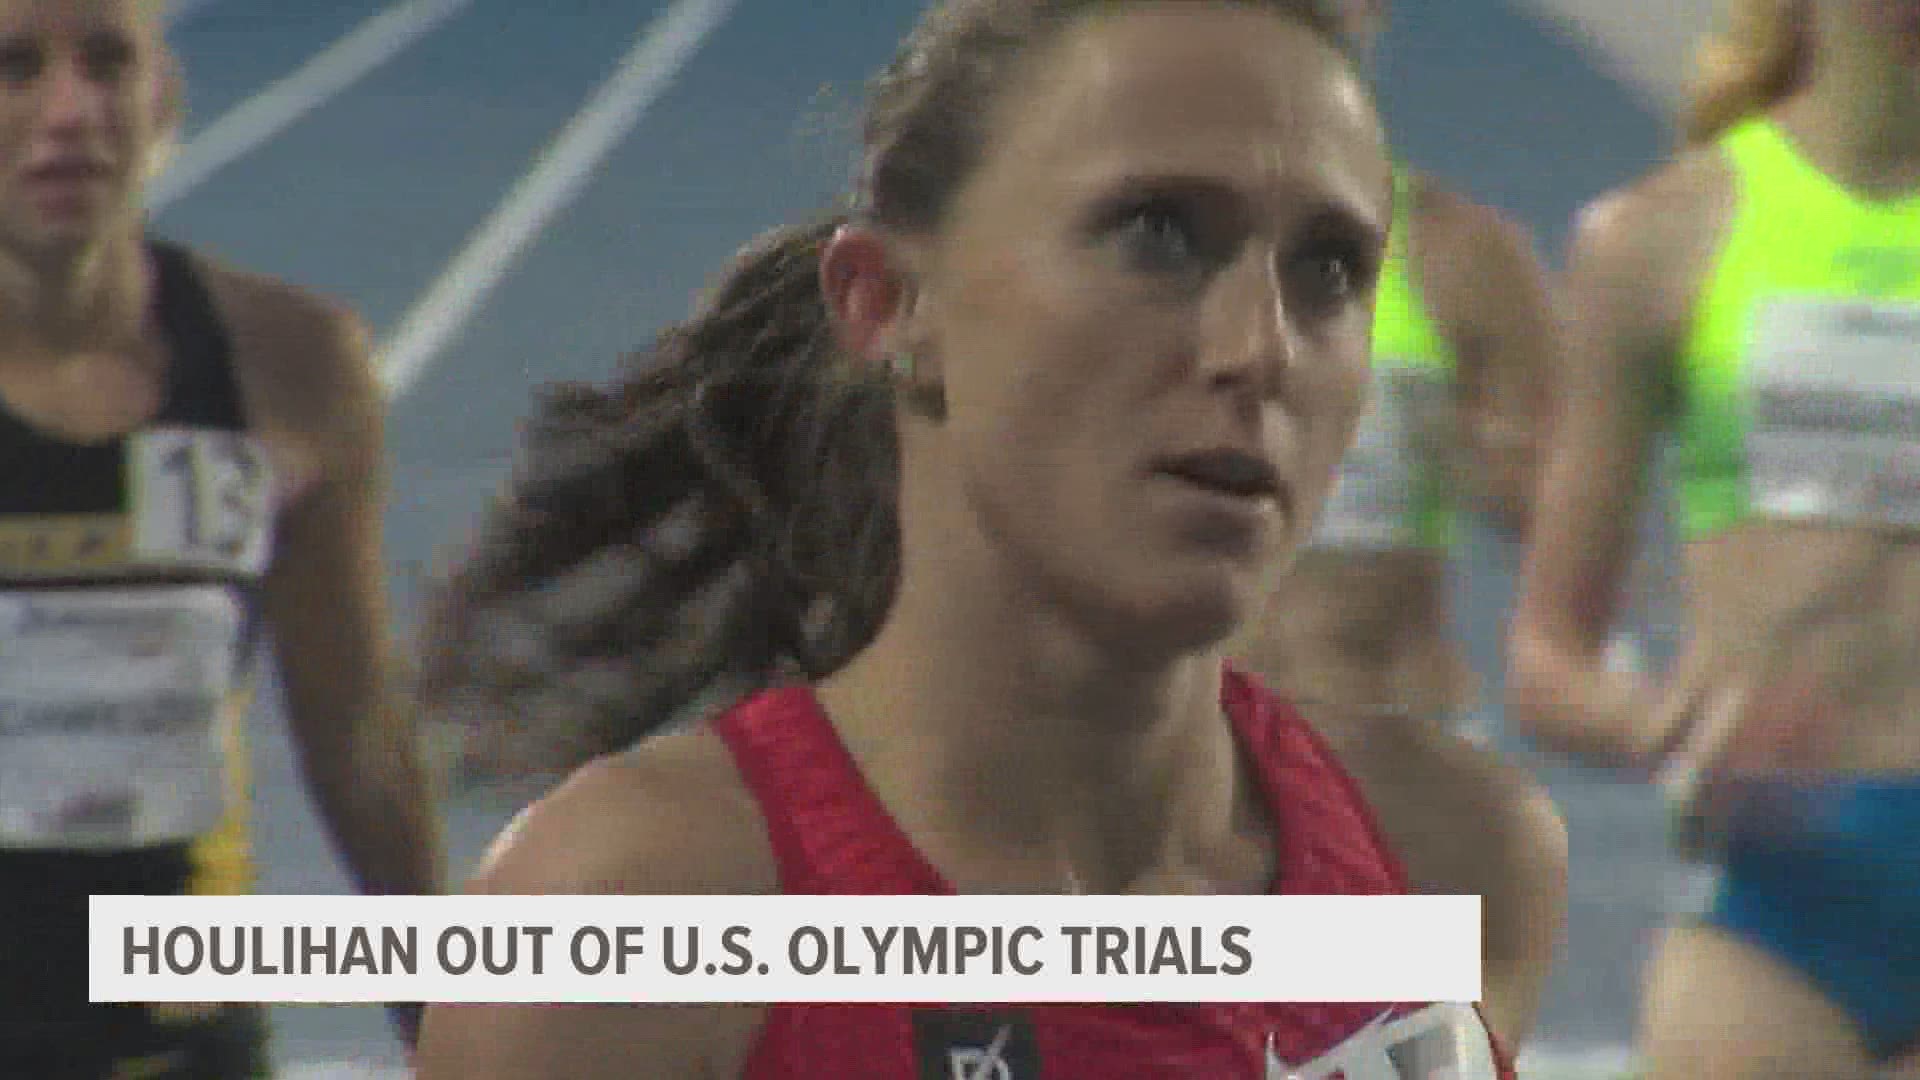 It appeared Houlihan, who tested positive for a banned substance, would be allowed to compete Friday. USA Track and Field has since reversed that decision.